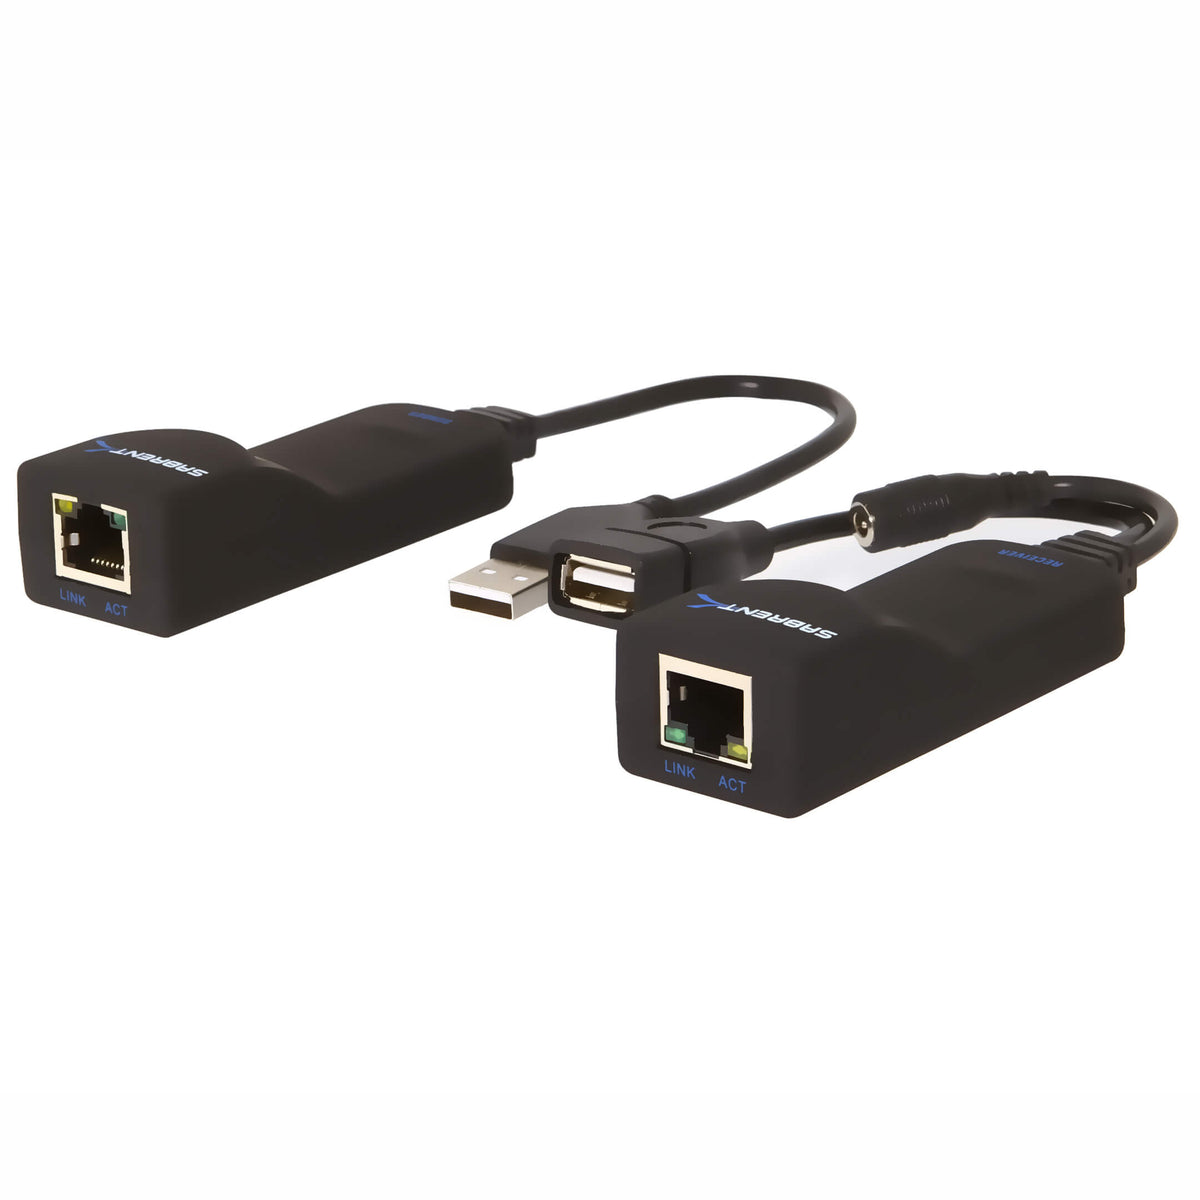 USB 2.0 Extender Adapter Over Cat5/5e/6/RJ45  Extension Cable With Power Adapters